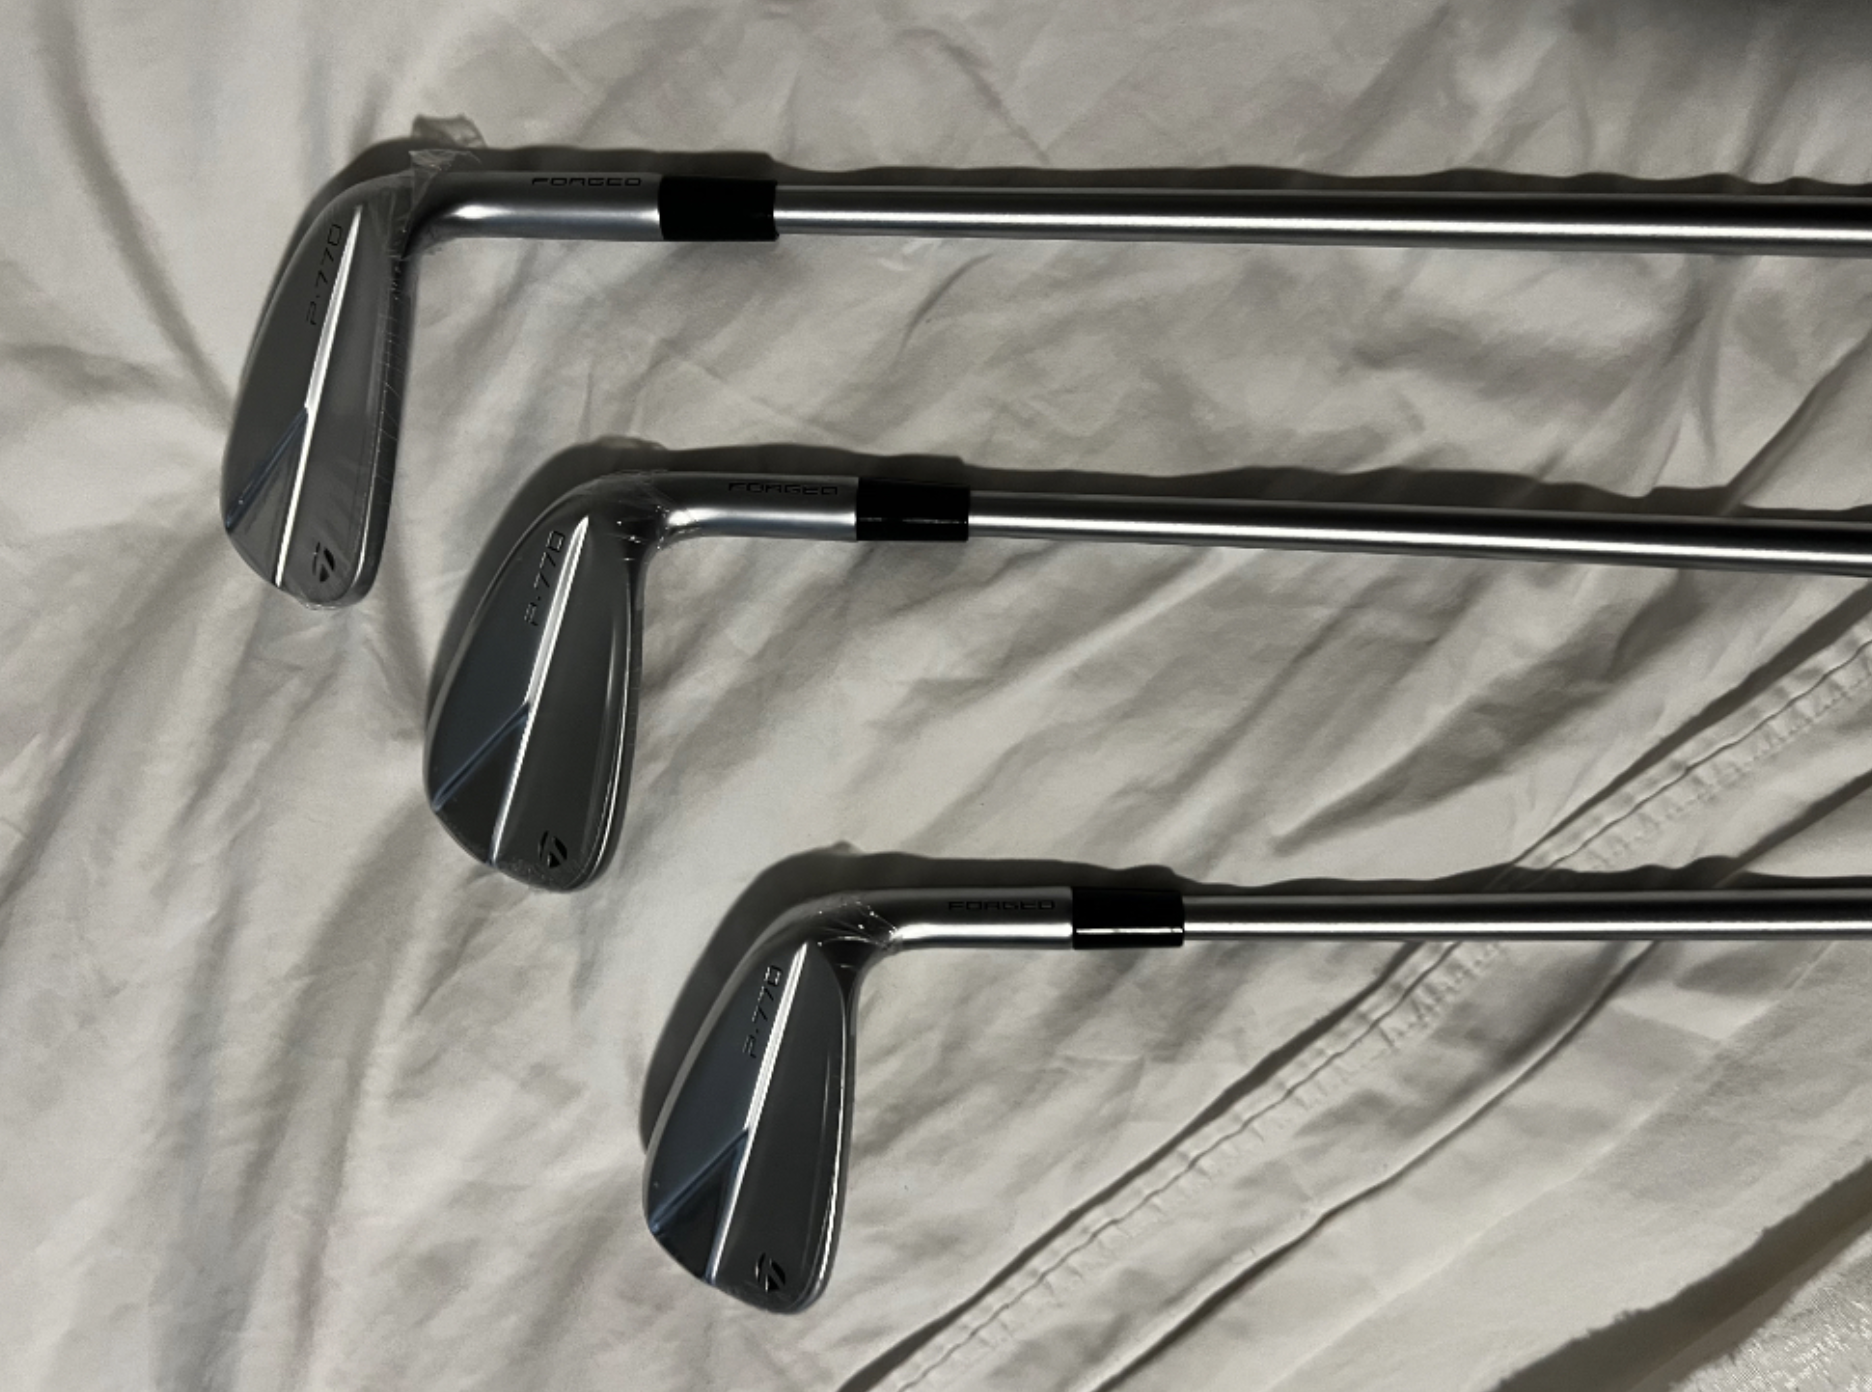 Coolest thing for sale in the GolfWRX Classifieds (5/19/23) Brand new 2023 TaylorMade P770 irons